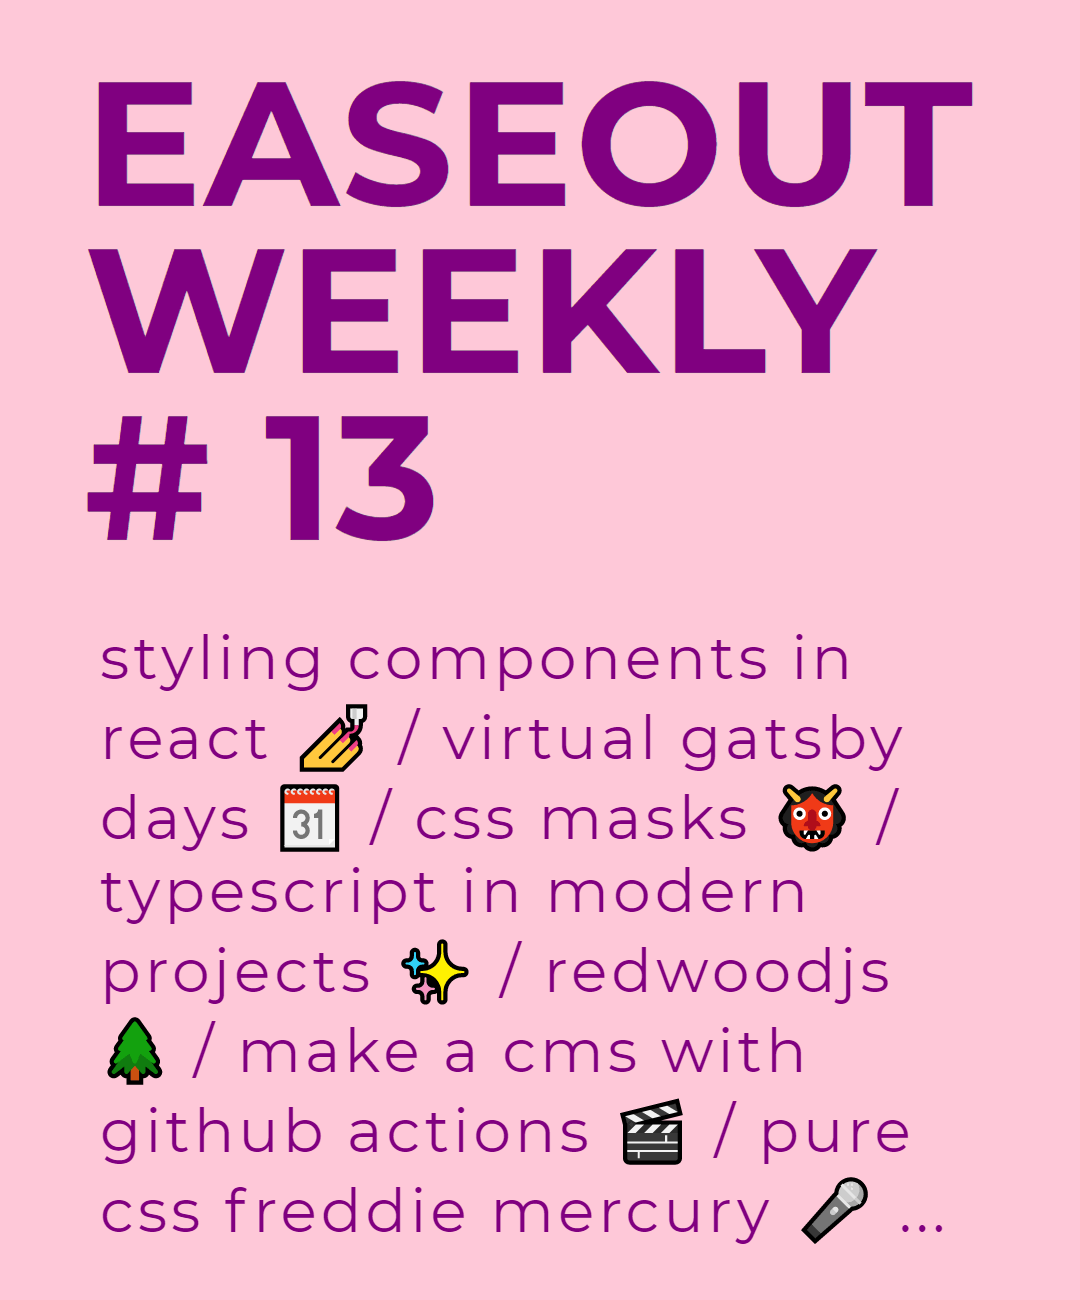 Easeout Weekly #13